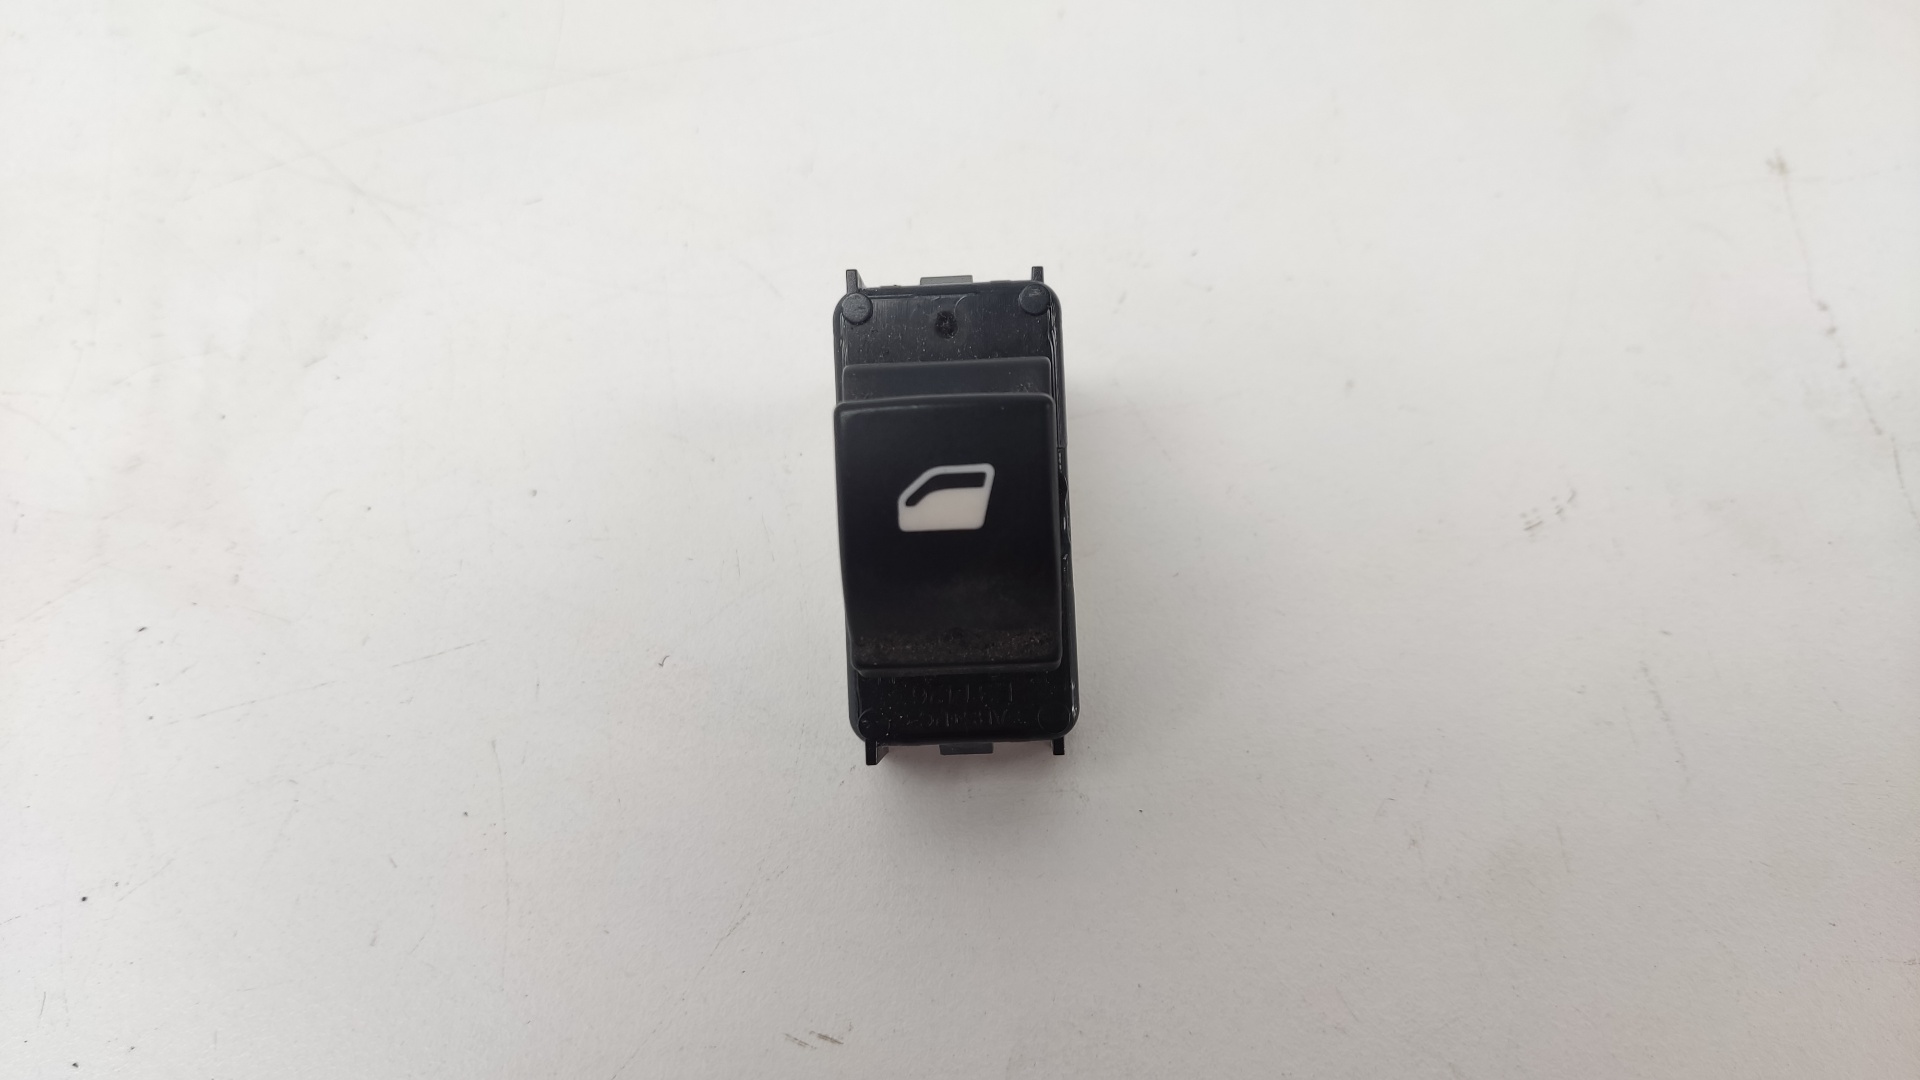 CITROËN C4 Picasso 2 generation (2013-2018) Rear Right Door Window Control Switch 967622927, 967622927 24582008